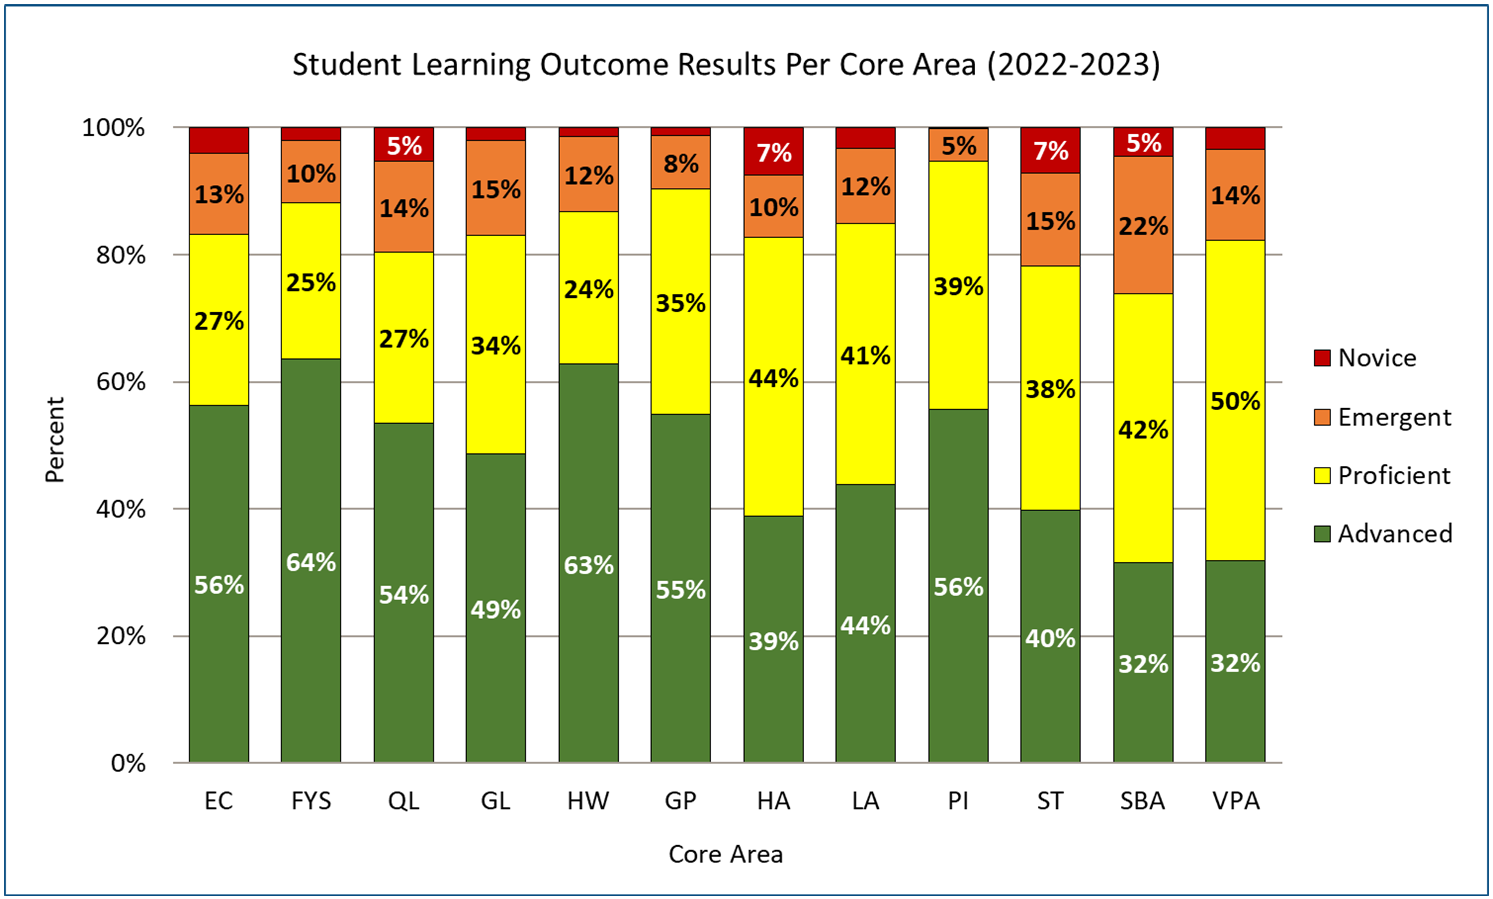 Graph of the percentage of 2022-2023 student outcome results within the Novice, Emergent, Proficient, or Advanced scoring categories. Results are shown for each Core area. Results: 83% of students scored Proficient or Advanced for EC. 88% of students scored Proficient or Advanced for FYS. 80% of students scored Proficient or Advanced for QL. 83% of students scored Proficient or Advanced for GL. 87% of students scored Proficient or Advanced for HW. 90% of students scored Proficient or Advanced for GP. 83% of students scored Proficient or Advanced for HA. 85% of students scored Proficient or Advanced for LA. 95% of students scored Proficient or Advanced for PI. 78% of students scored Proficient or Advanced for ST. 74% of students scored Proficient or Advanced for SBA. 82% of students scored Proficient or Advanced for VPA.